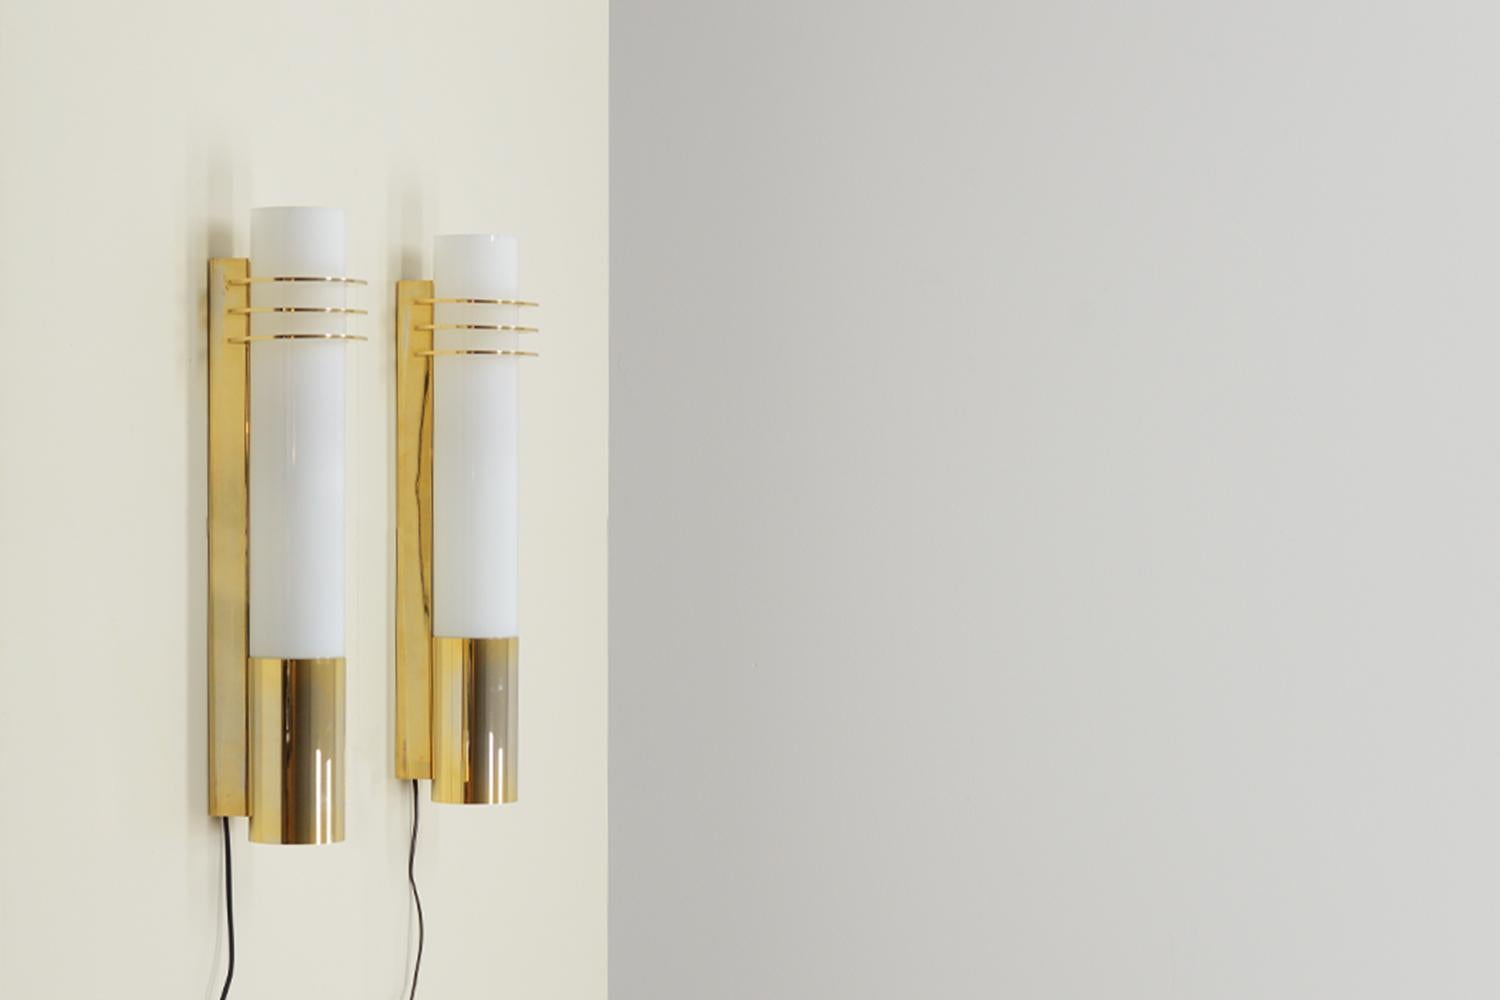 Set of 2 large sconces by Limburg Glashütte. Gold / brass colored wall mount and thick white glass shade. 2 E27 light bulb holders. Some color fading, rest in good vintage condition. Price for the set of 2.

 